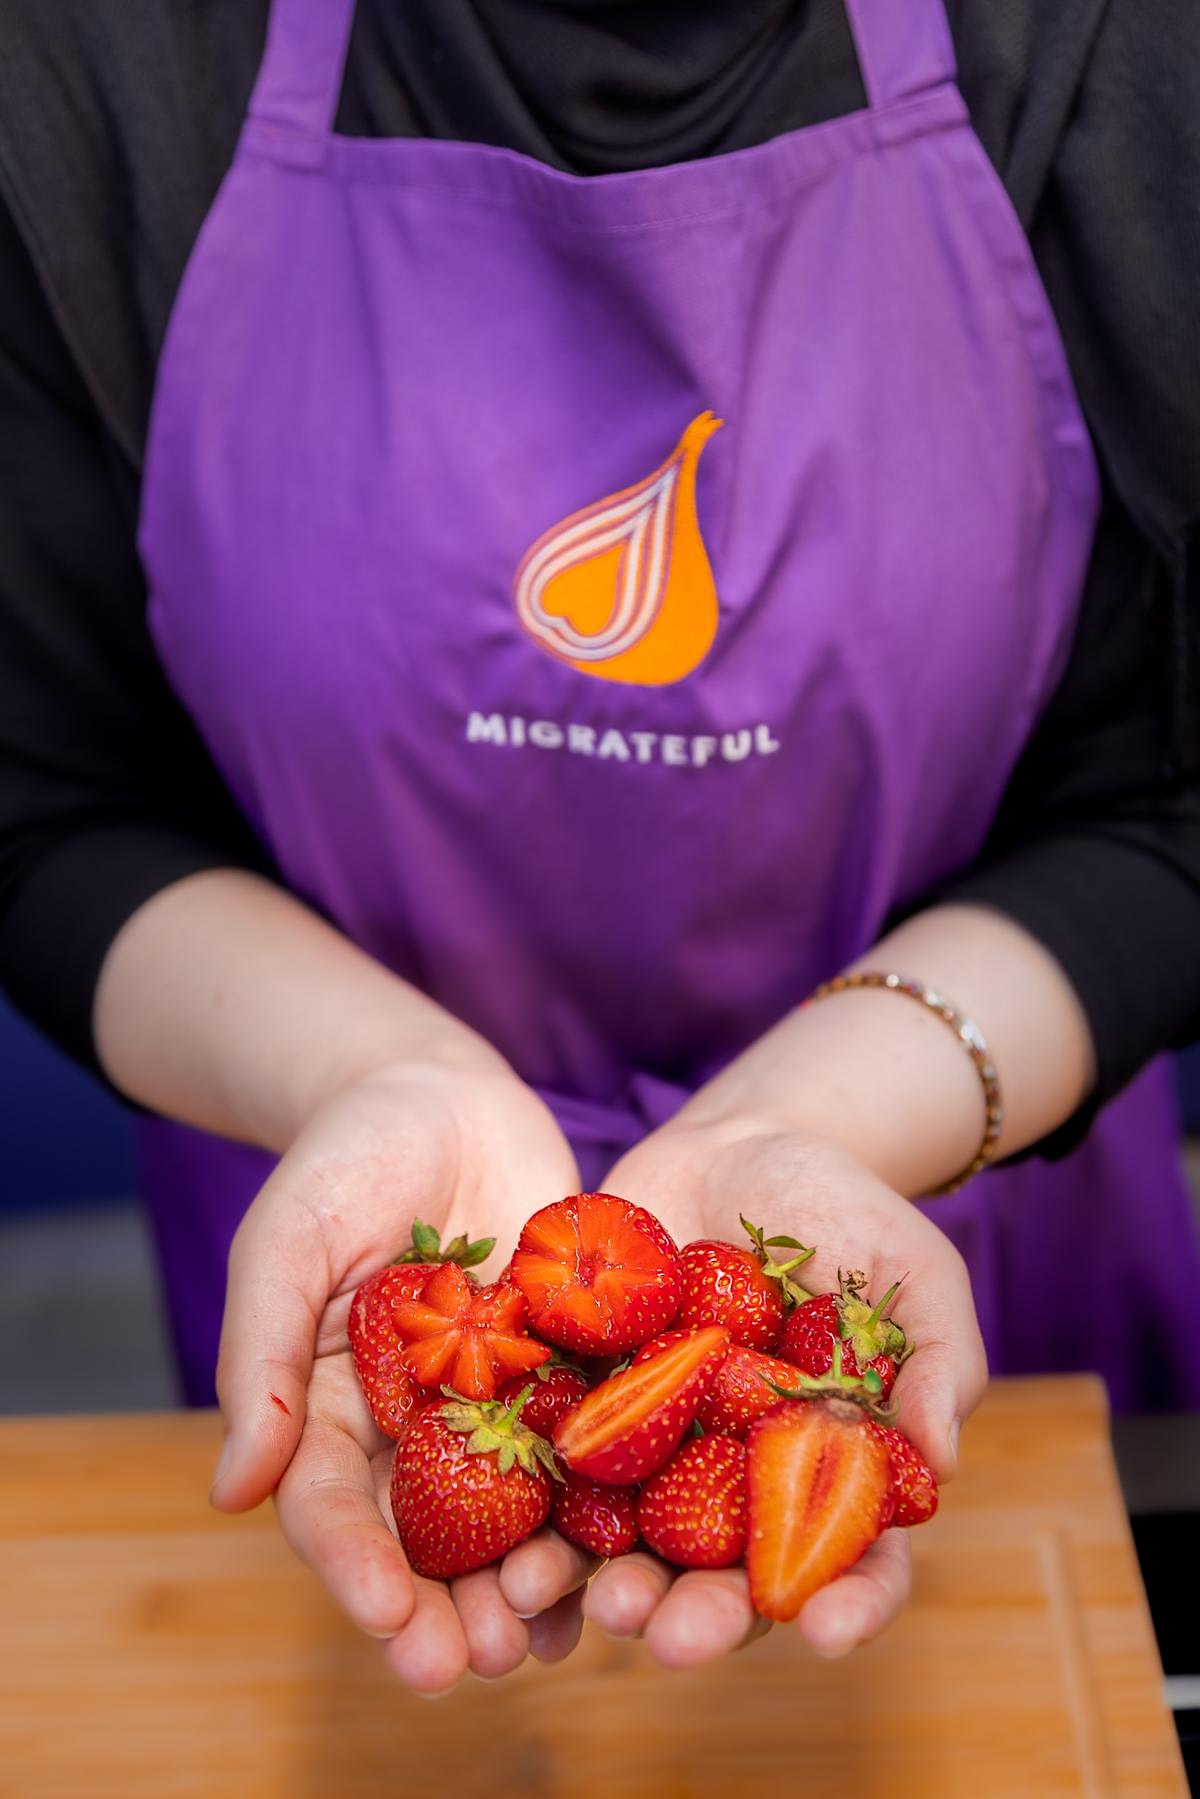 Description: A woman holding strawberries in a purple apron, participating in a London Cookery Class.